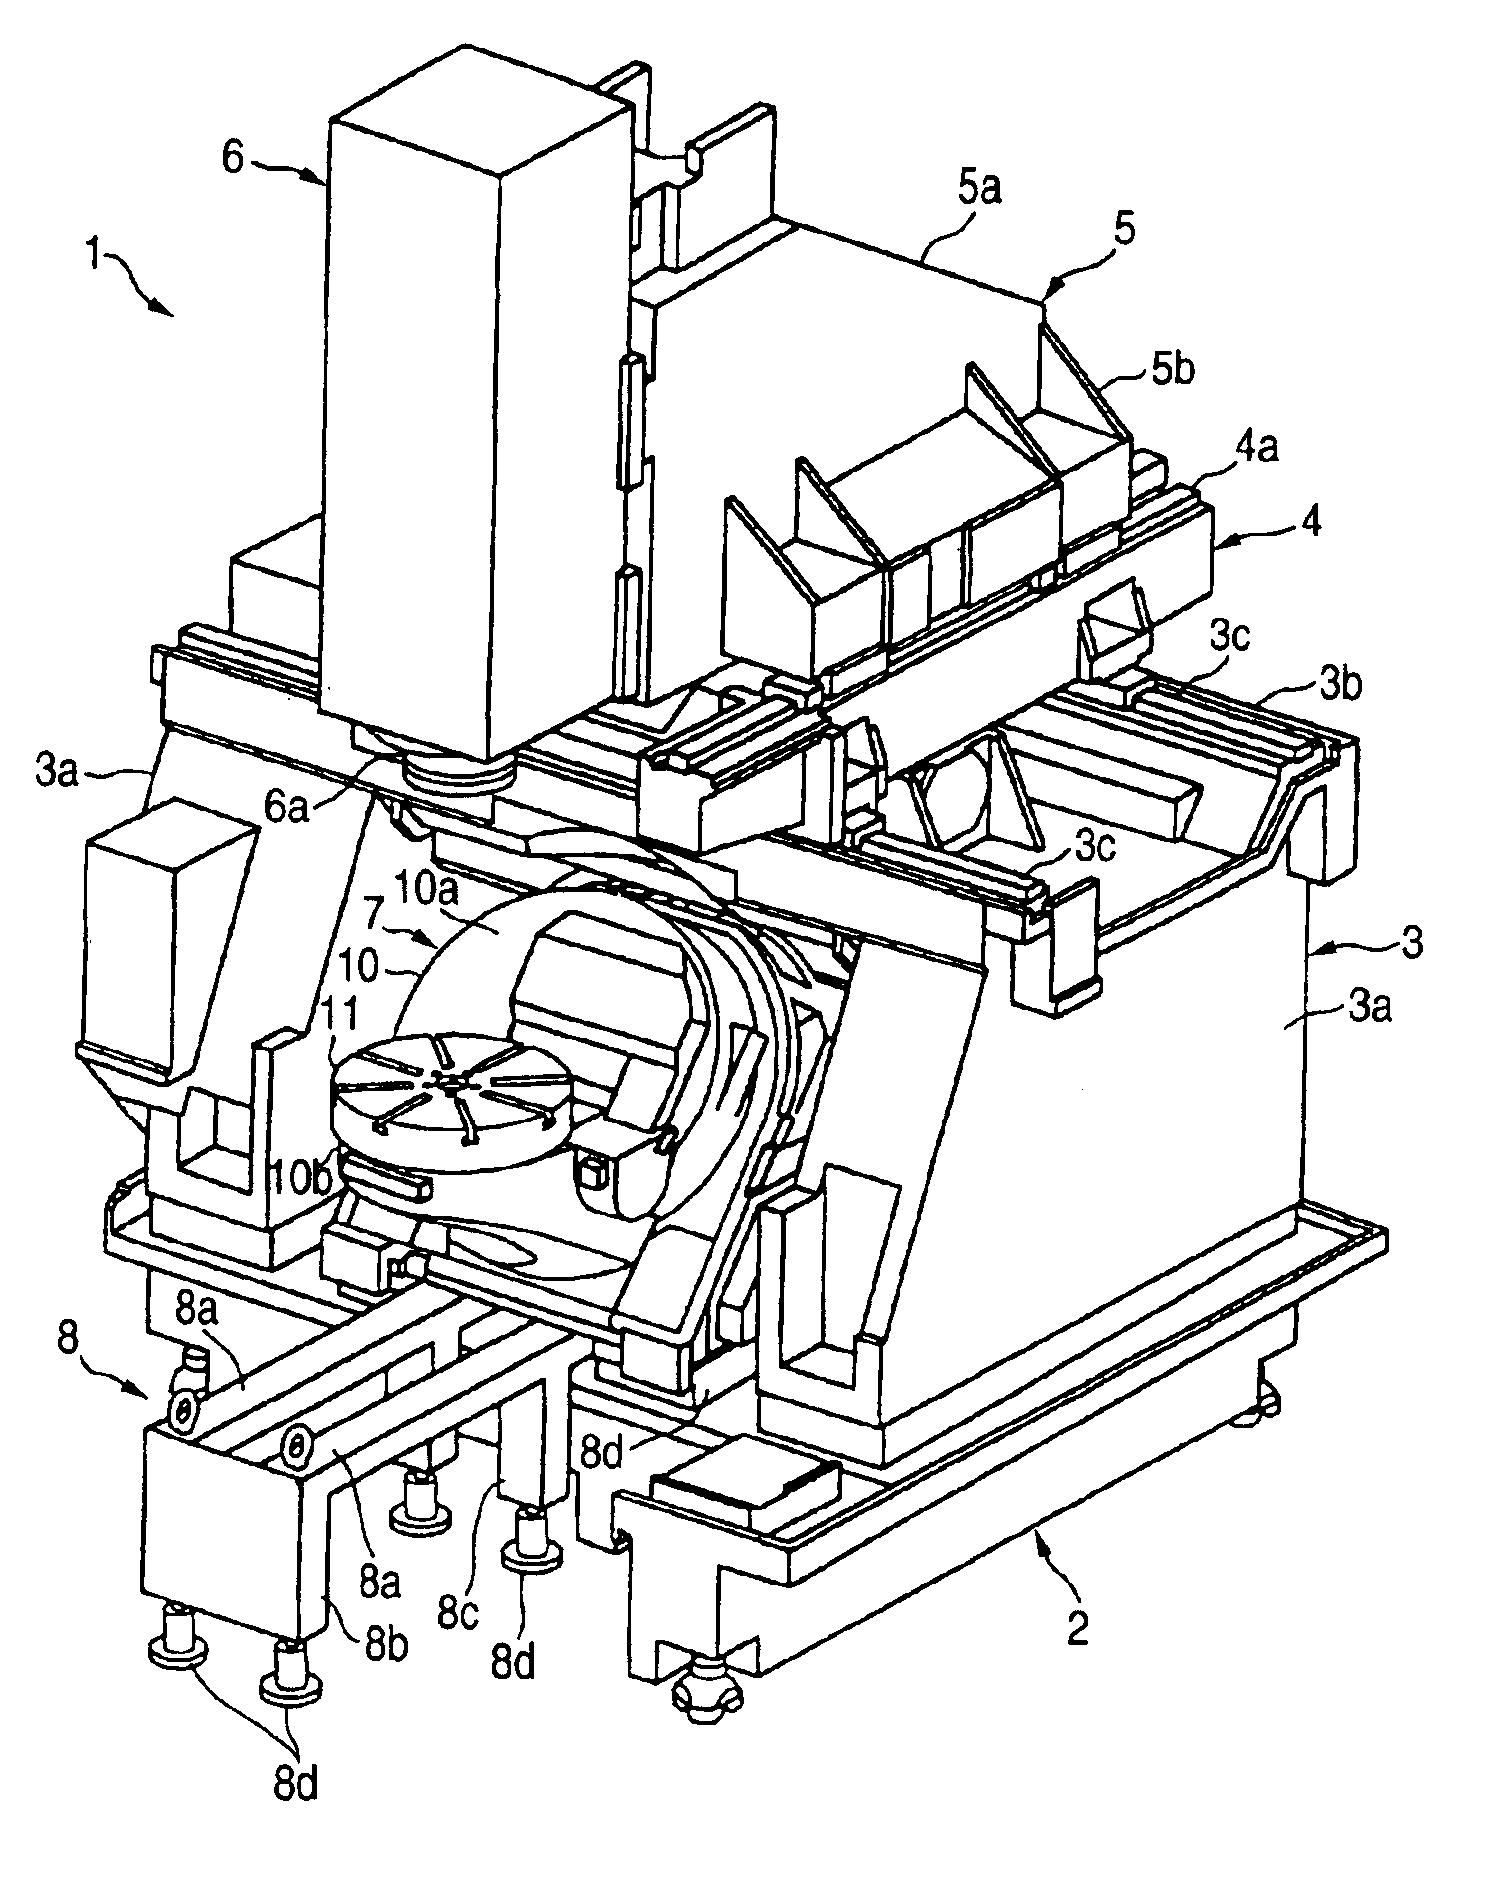 Multi-axial machine tool and table unit mounting jig